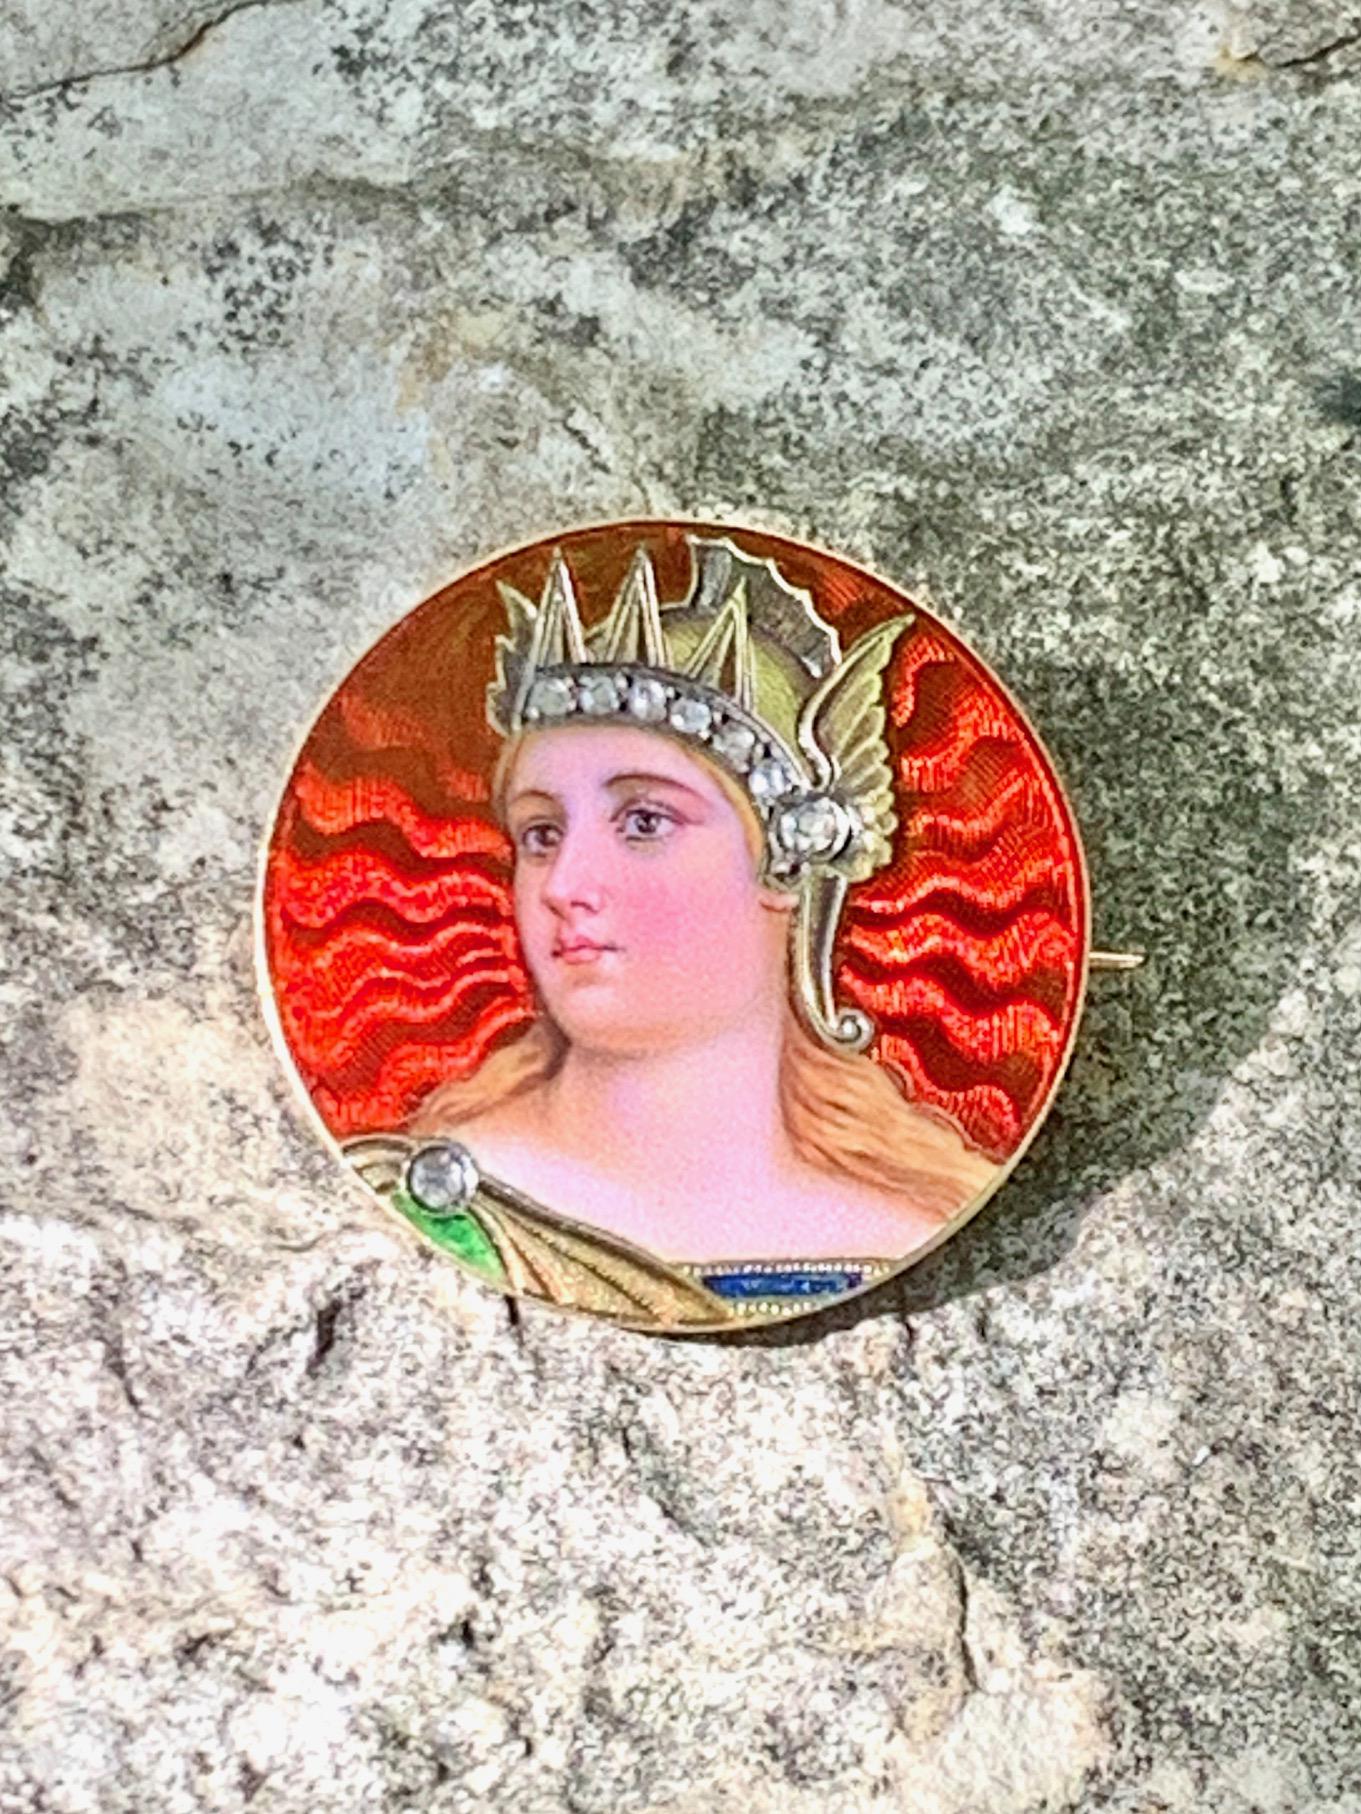 This antique 18 karat gold French Guilloche Enamel Portrait Brooch features eight rose cut Diamonds.

This piece is from the late 1800's.

It has two unknown stamps on the back side.

The brooch features:
8 rose cut Diamonds
Size: approximately 1